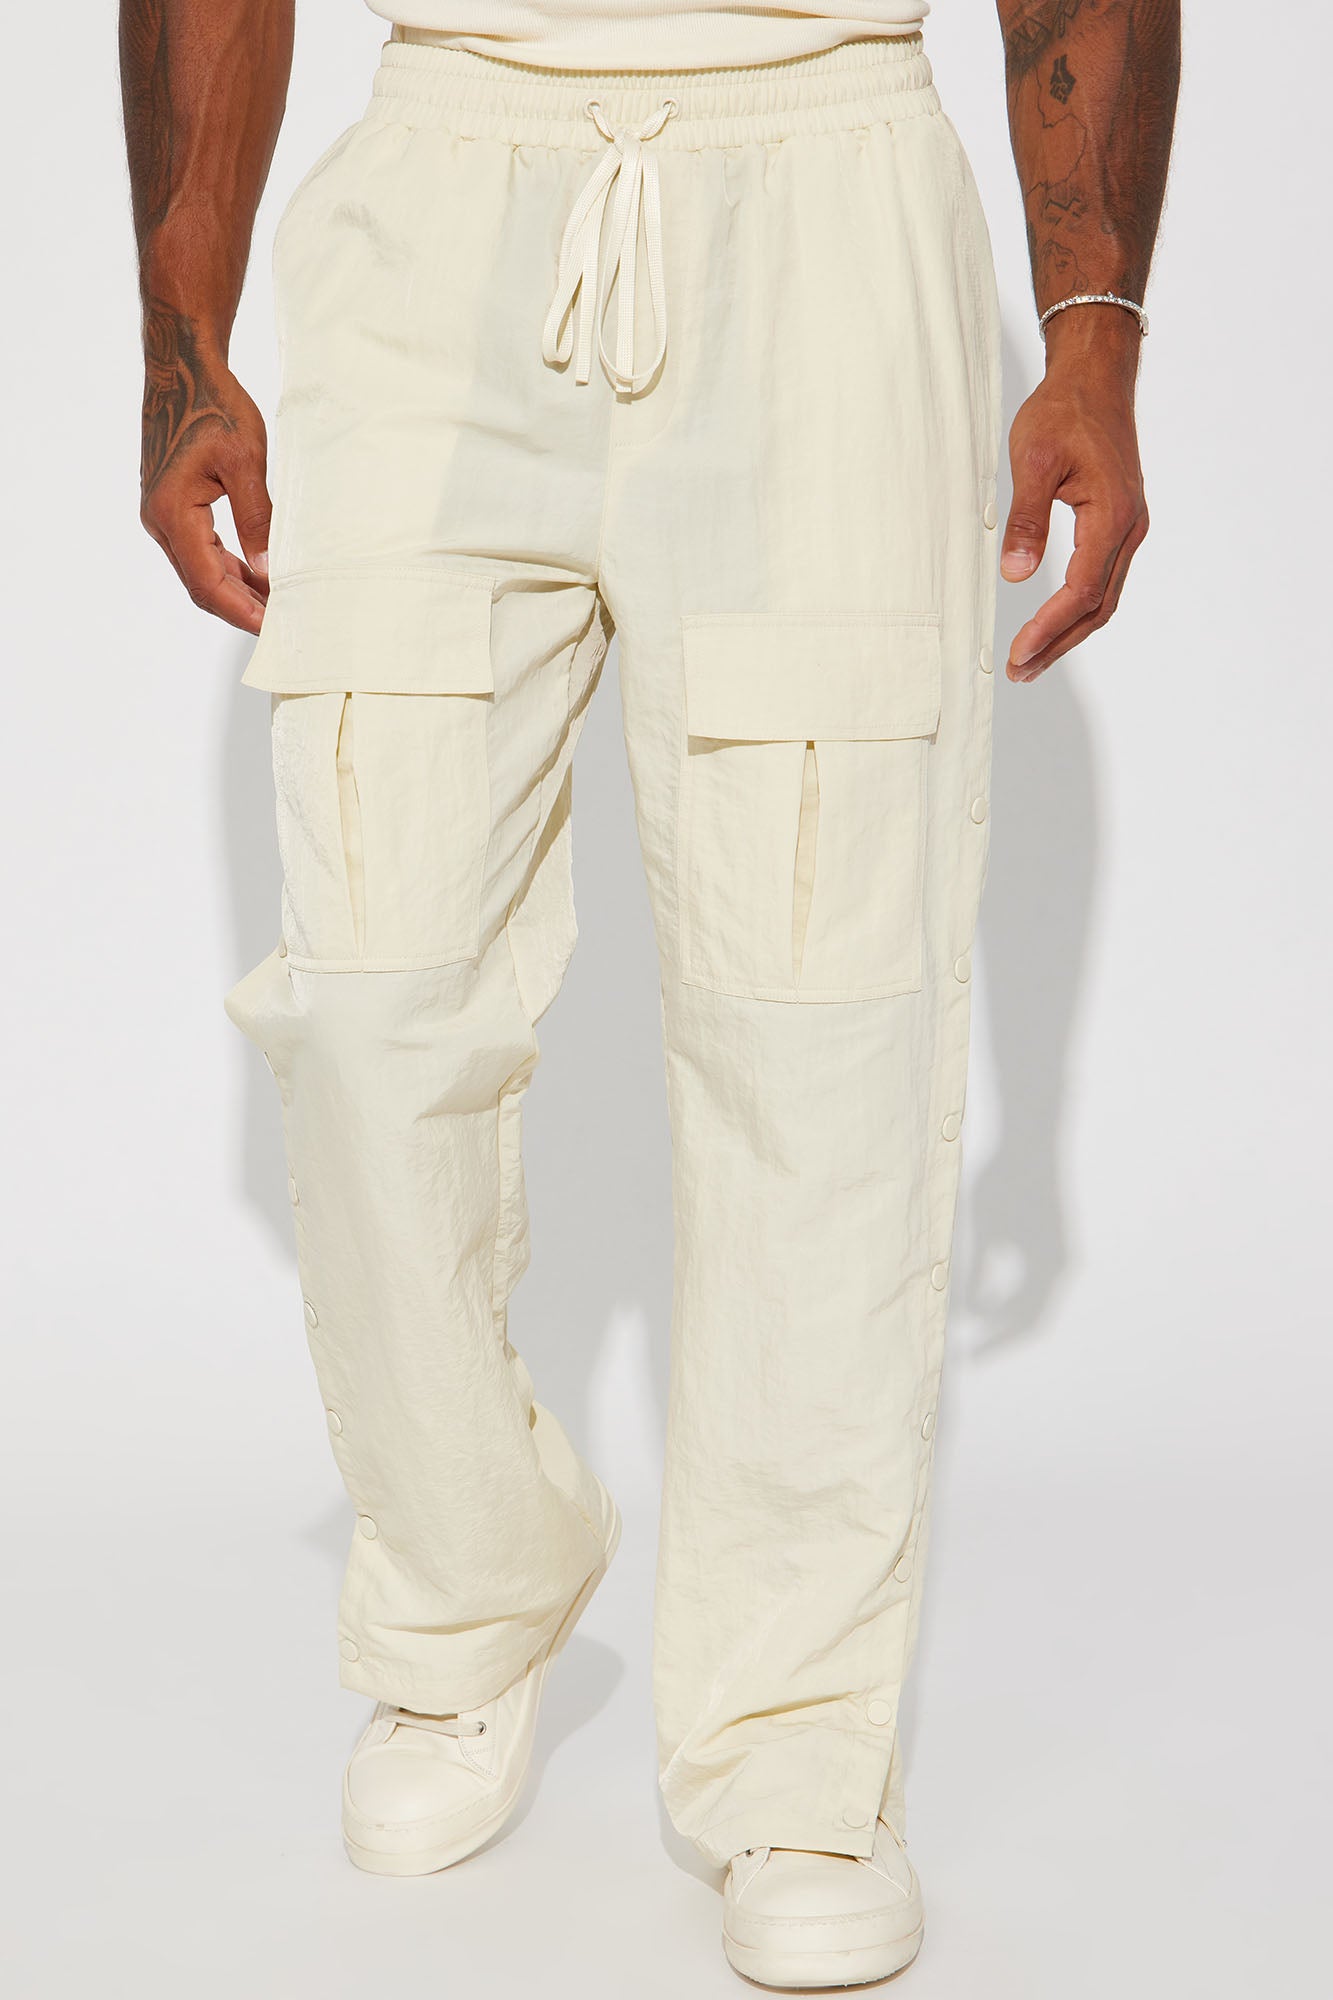 Carrying Weight Nylon Snap Cargo Pants - Off White